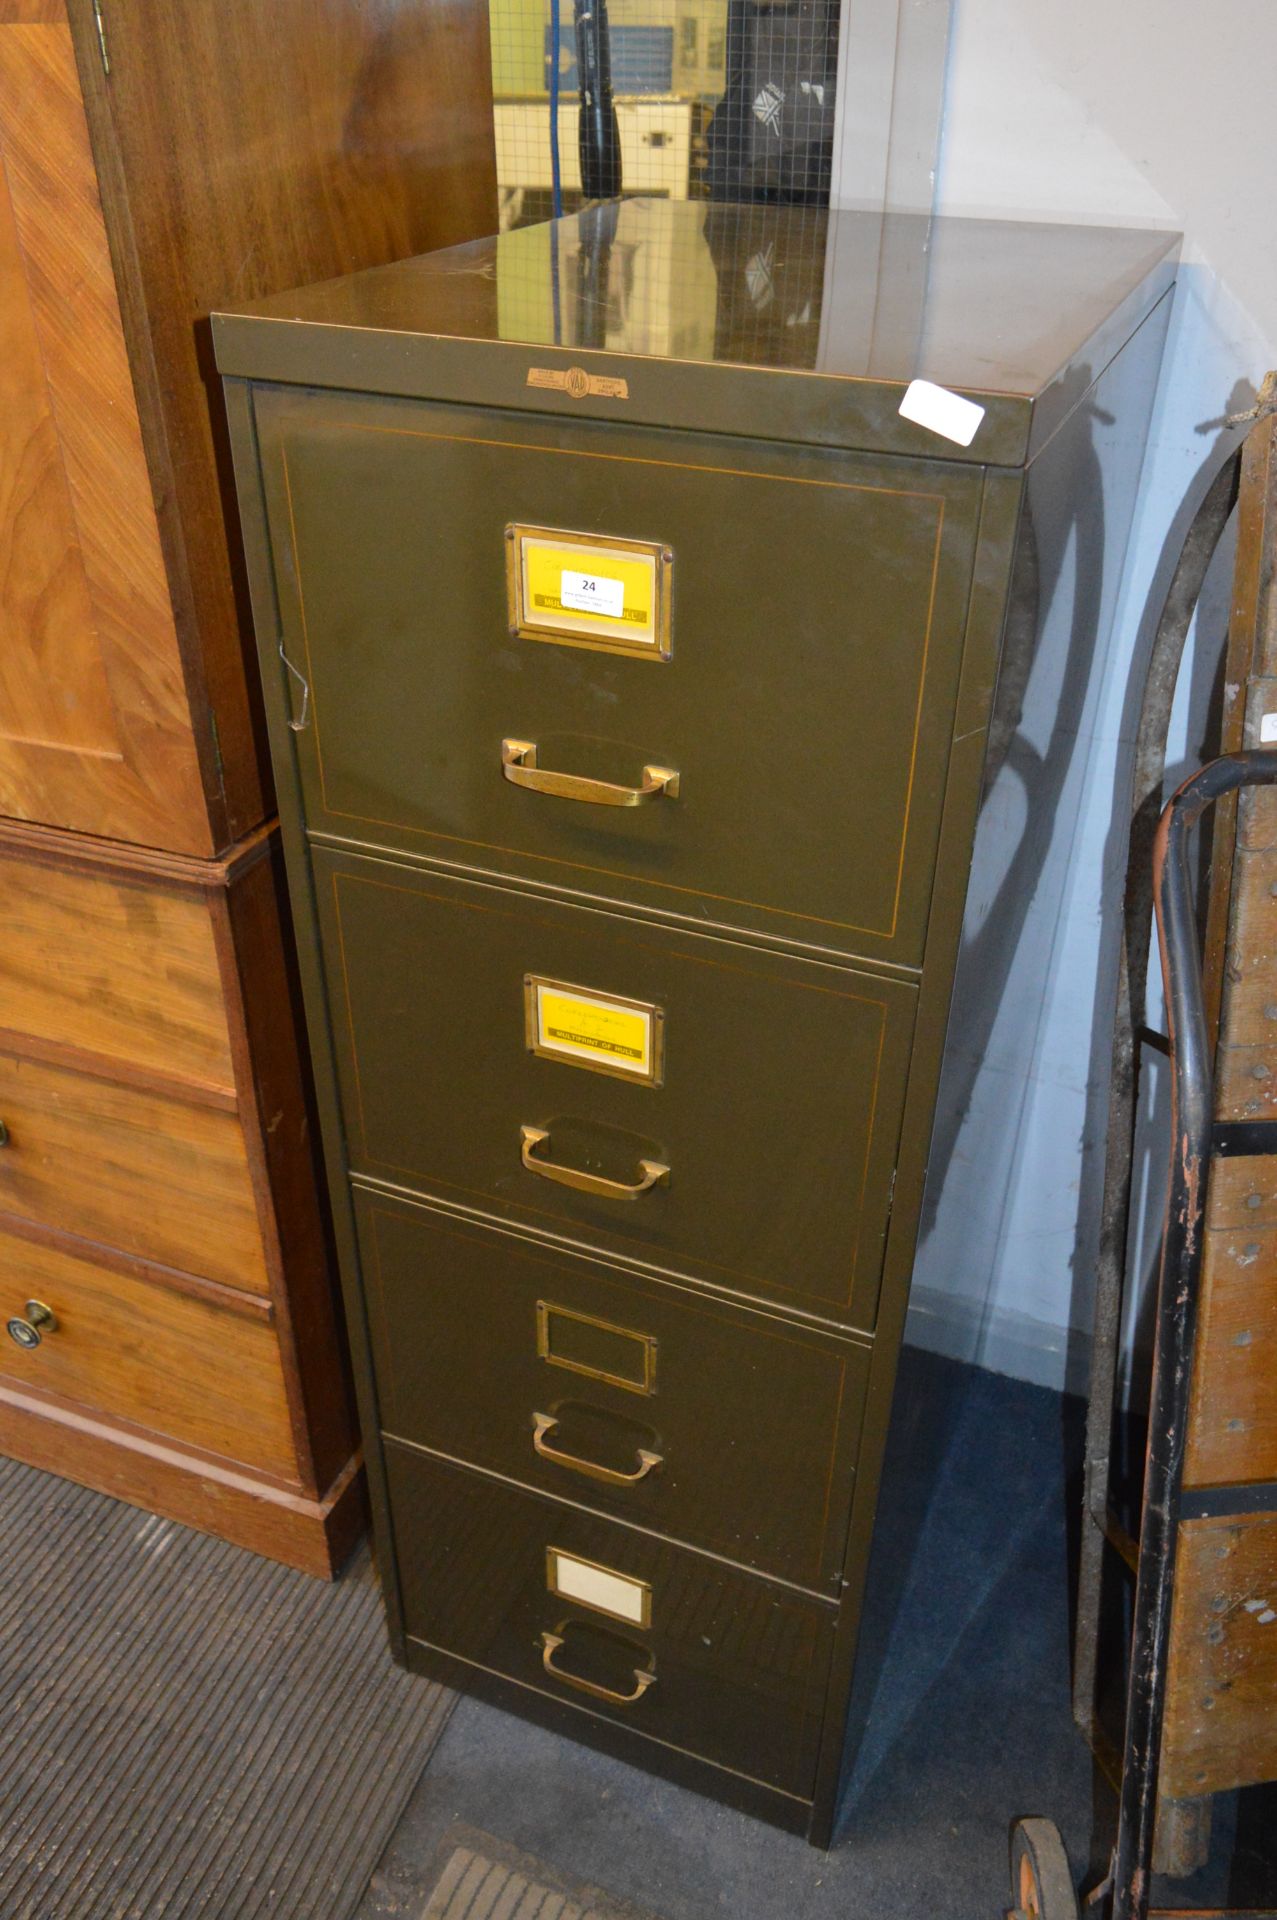 Vickers Armstrongs Green Metal Four Drawer Filing